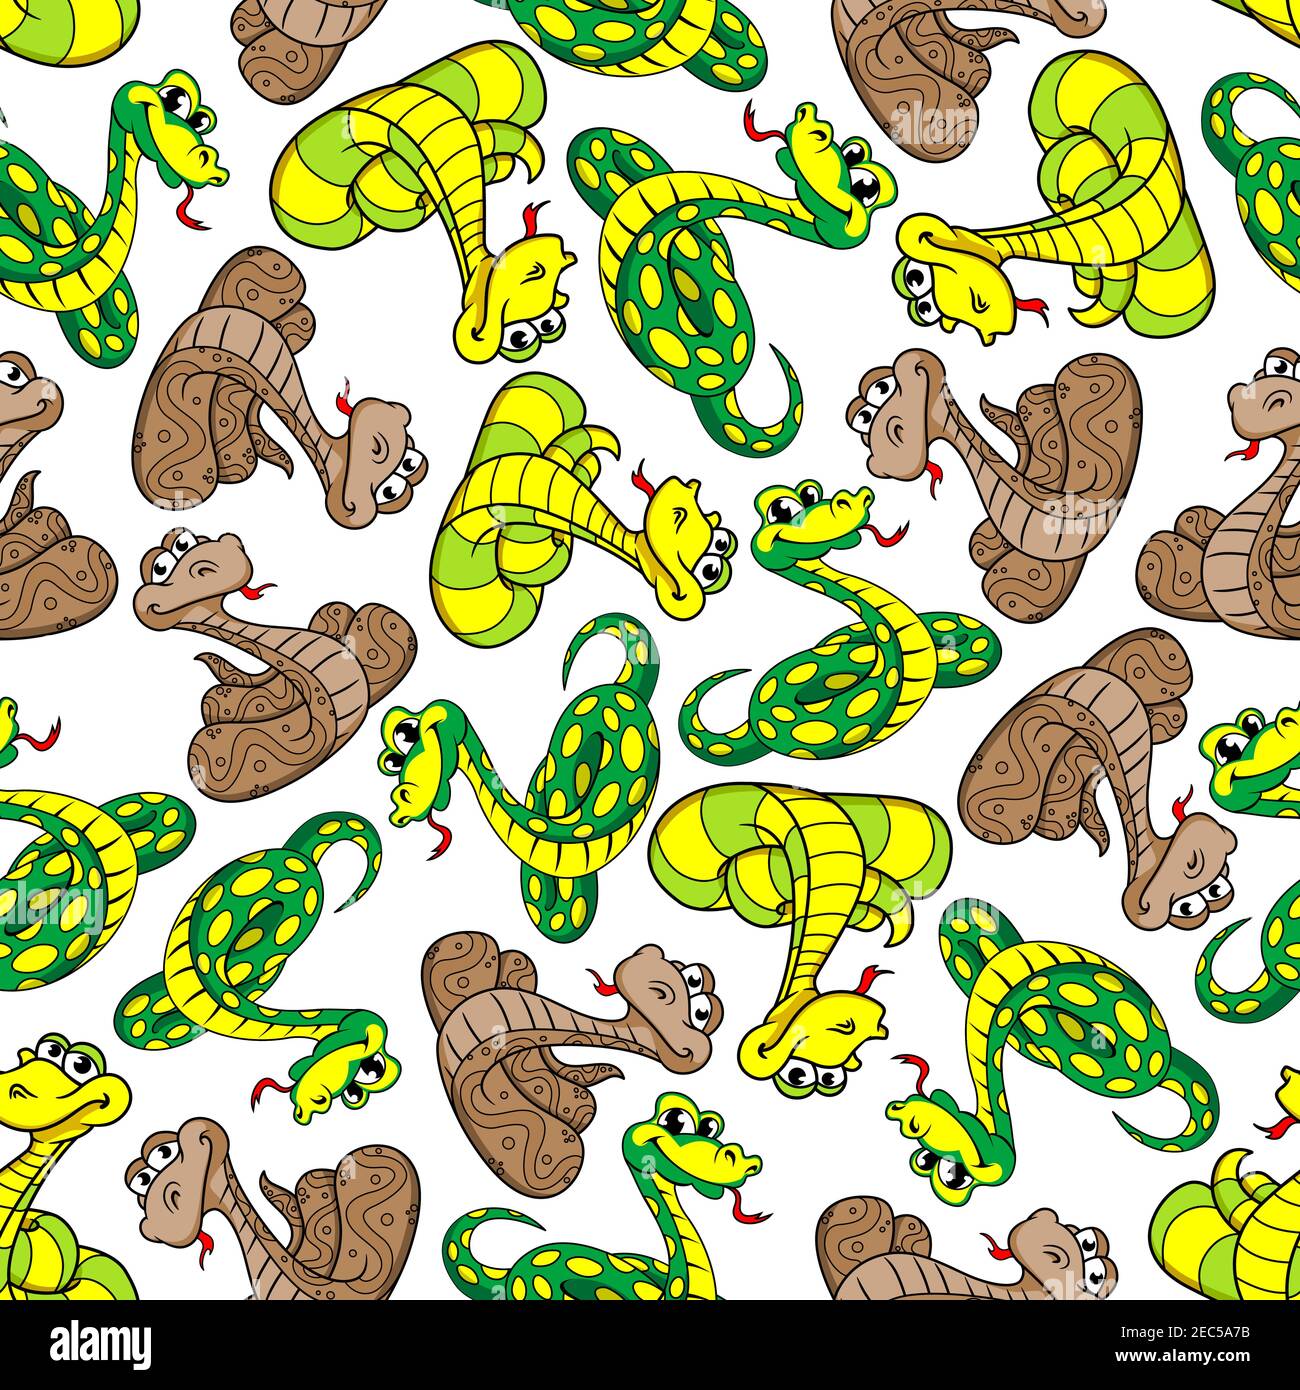 Cartoon snakes seamless pattern of green and brown reptiles with yellow spots and stripes over white background. Childish room interior or wildlife de Stock Vector